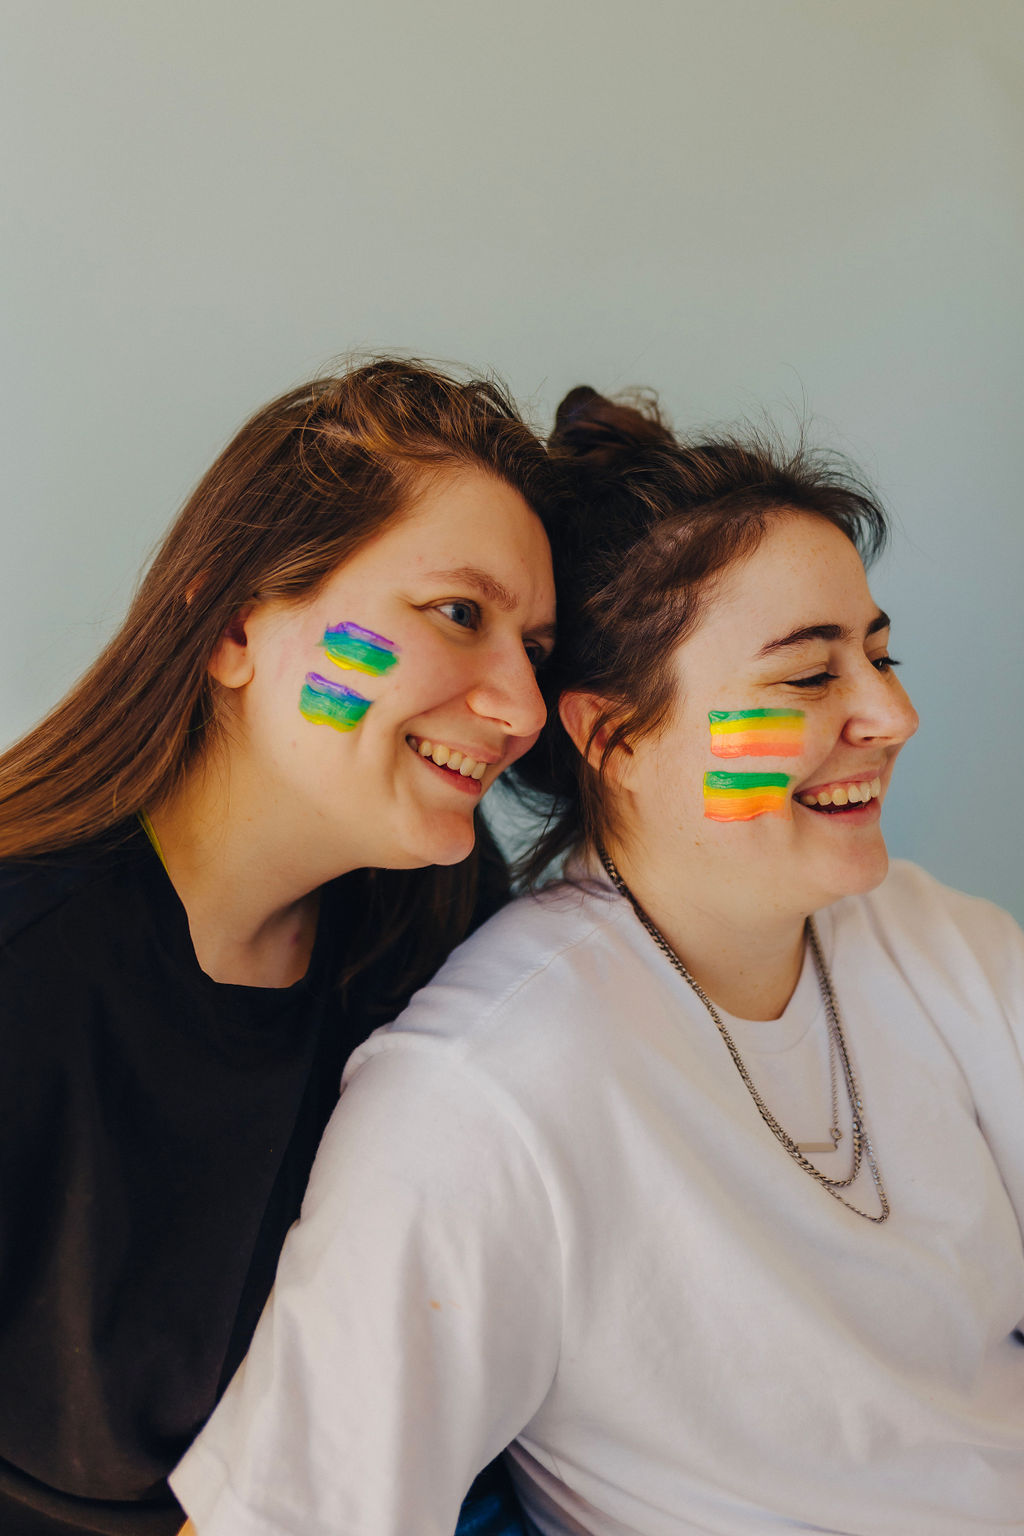 Two girls with paint on their face smile while thinking about boundaries in business.